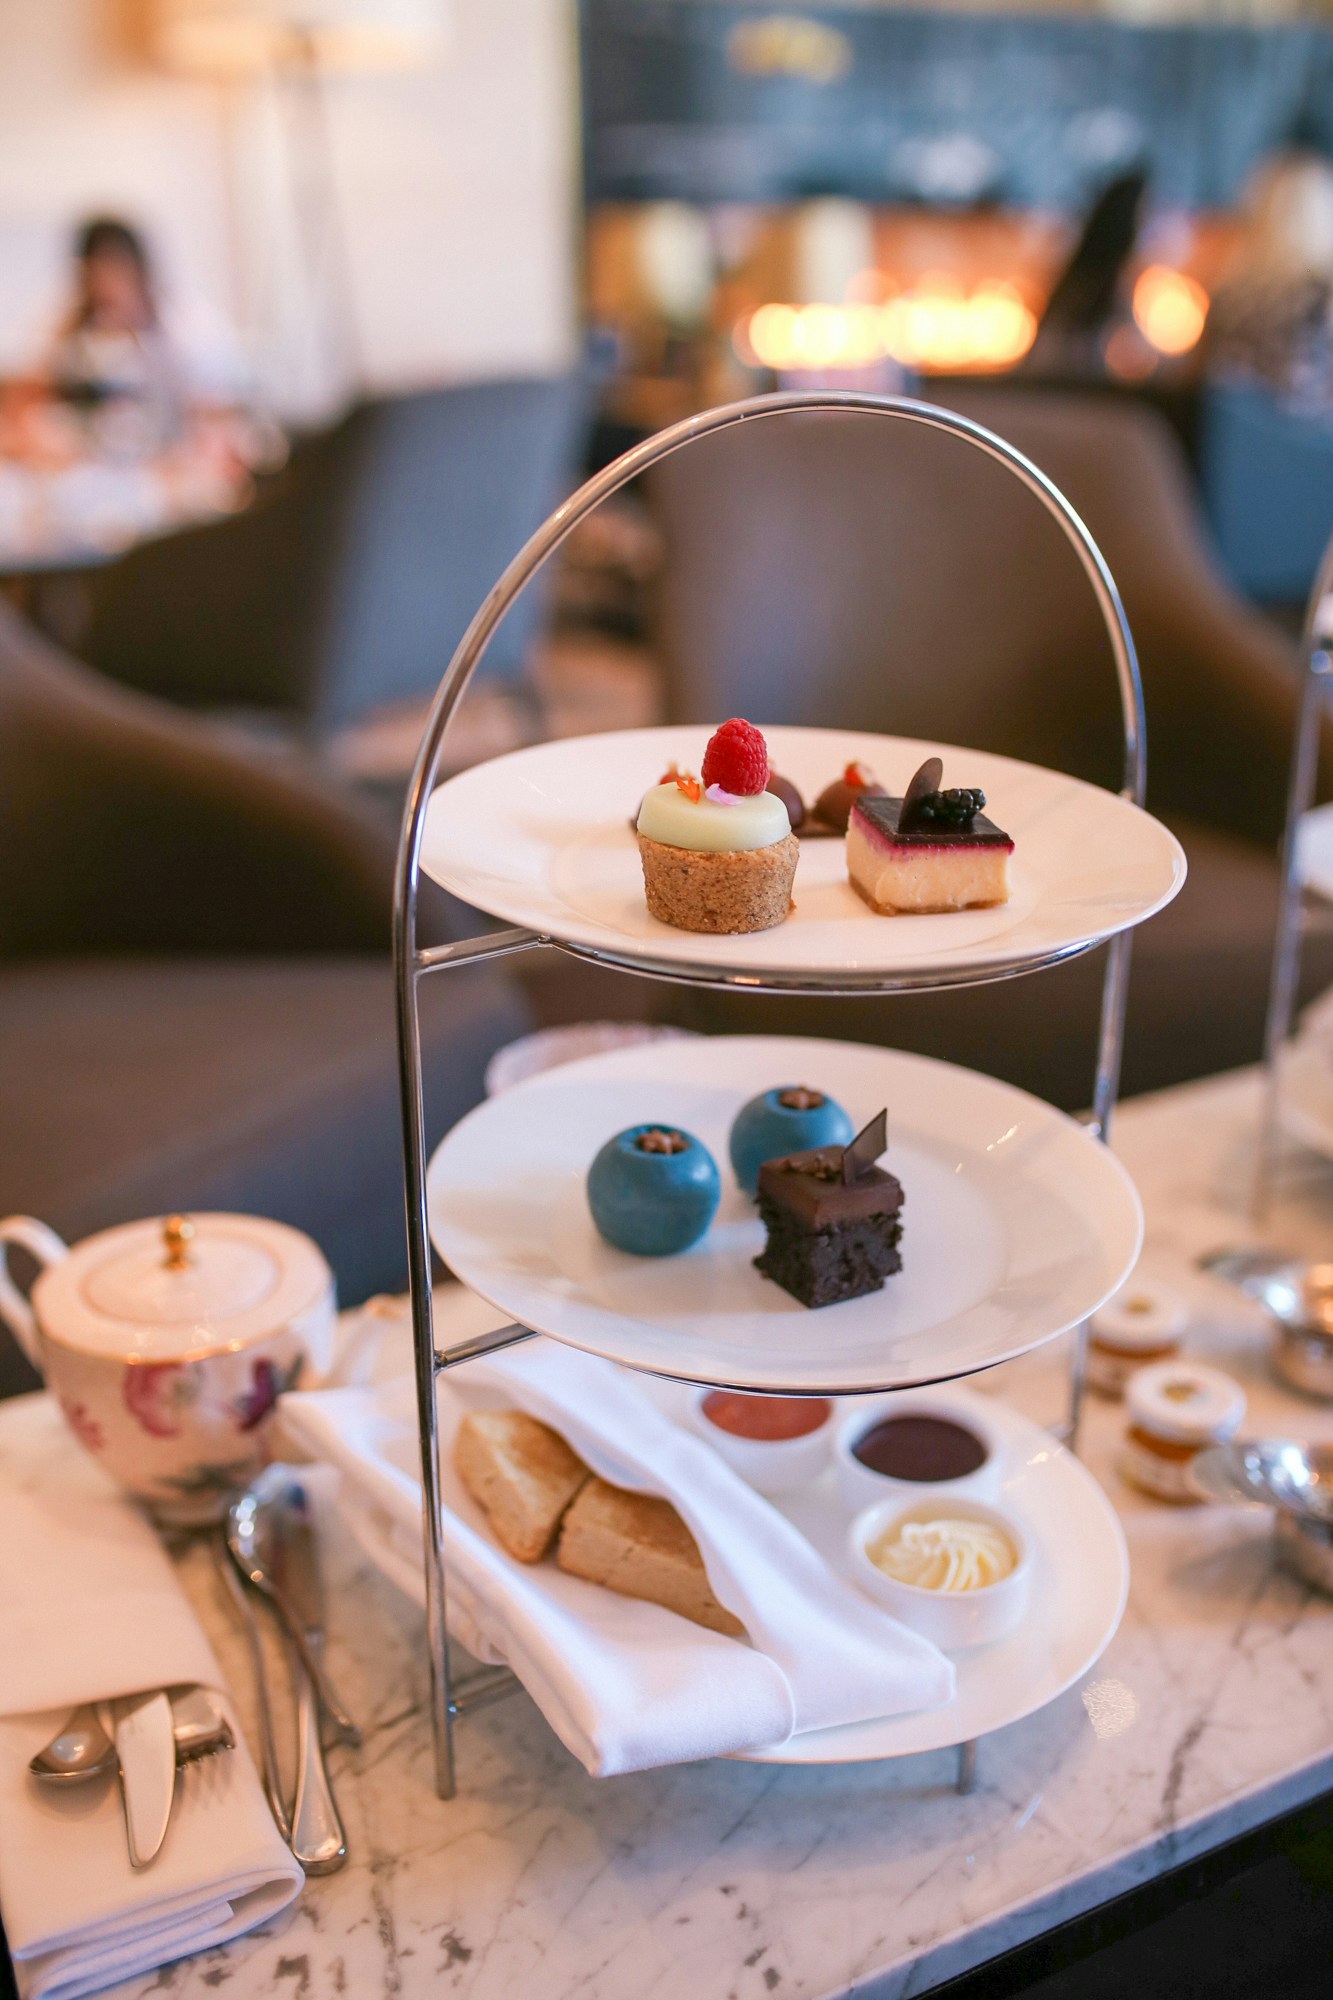 Gluten-free Afternoon High Tea at the Shangri-La.